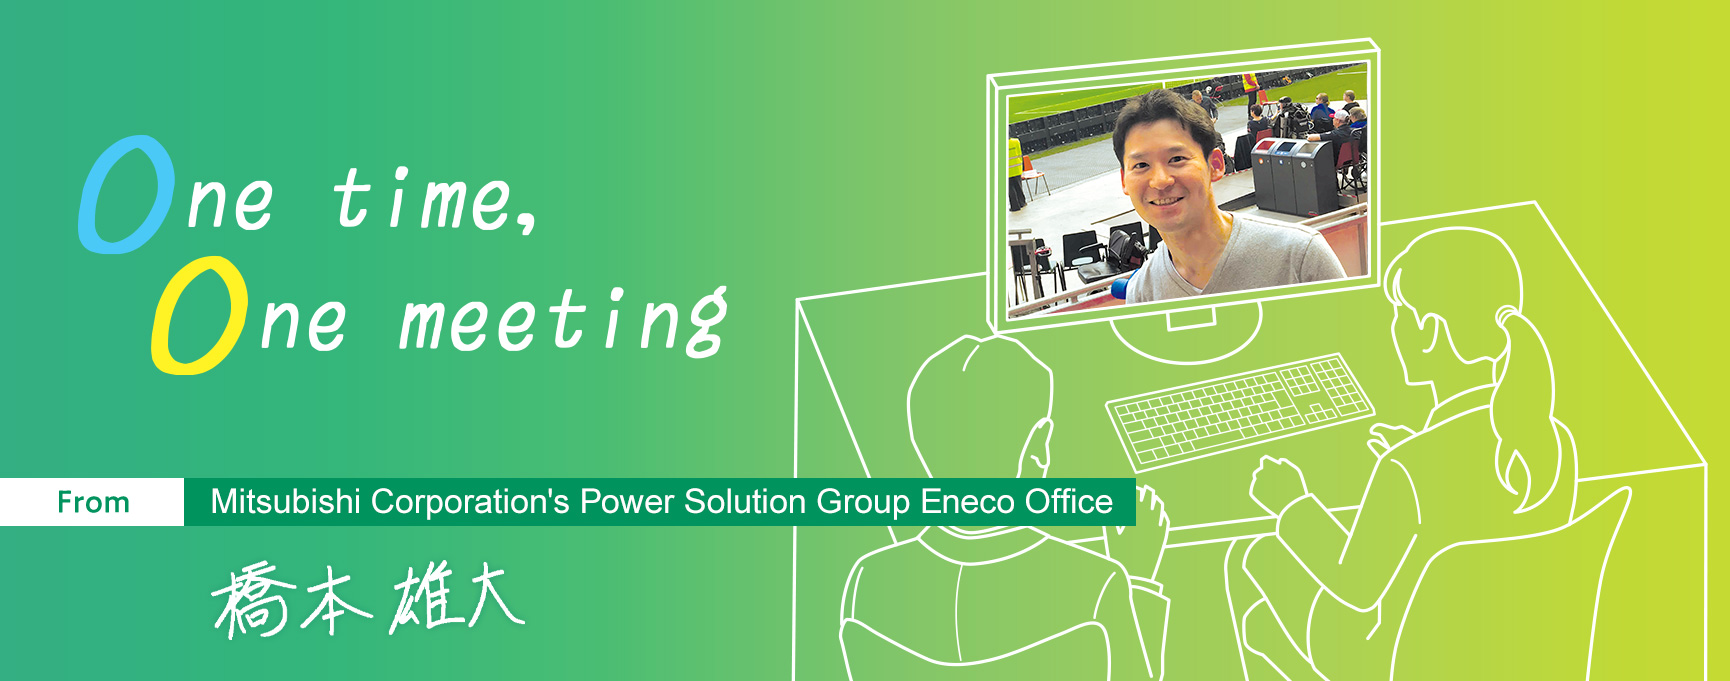 One time, One meeting From Mitsubishi Corporation's Power Solution Eneco Office